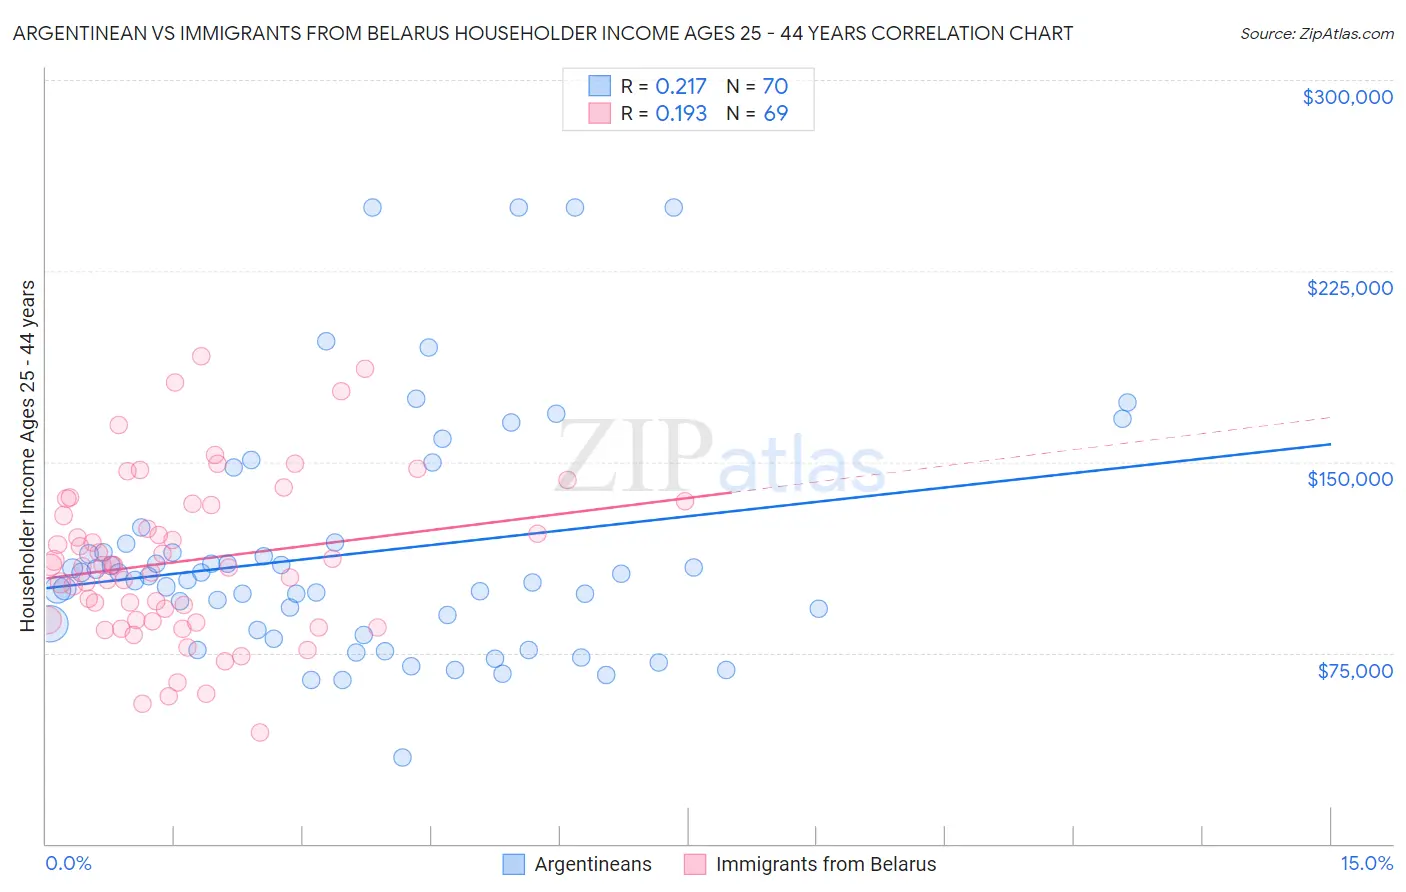 Argentinean vs Immigrants from Belarus Householder Income Ages 25 - 44 years